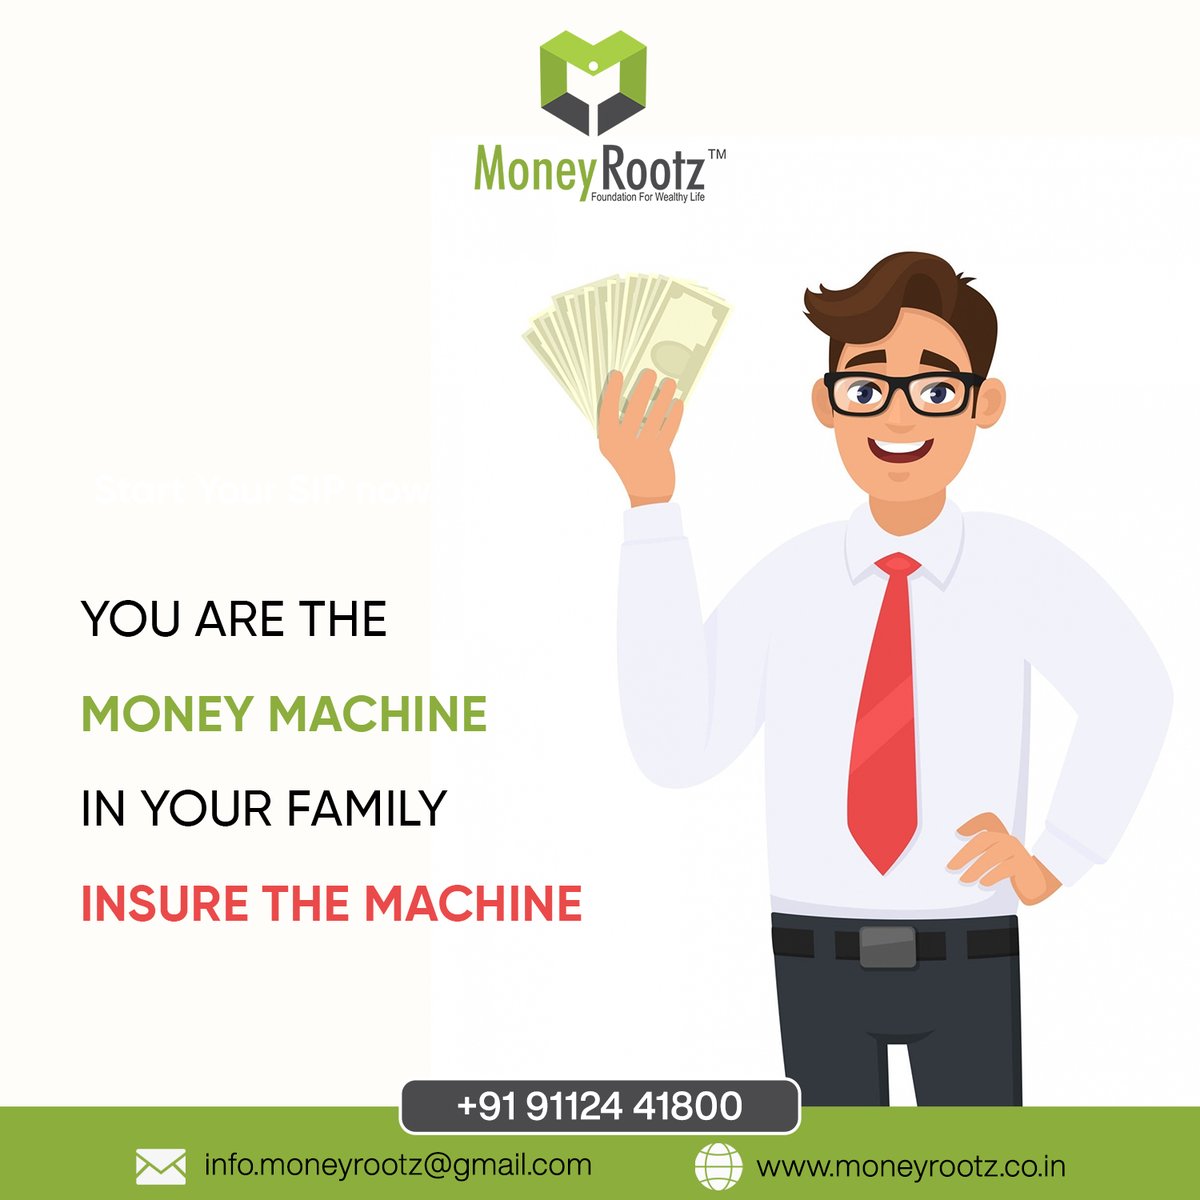 You are the Money Machine in your family

Insure the Machine with Moneyrootz

#moneymachine #money #insurance #financial #insurance #protection #healthinsurance #medicalinsurance #mediclaim #financialknowledge #financialeducation #insurancezaroorihai #moneyrootz #teammoneyrootz